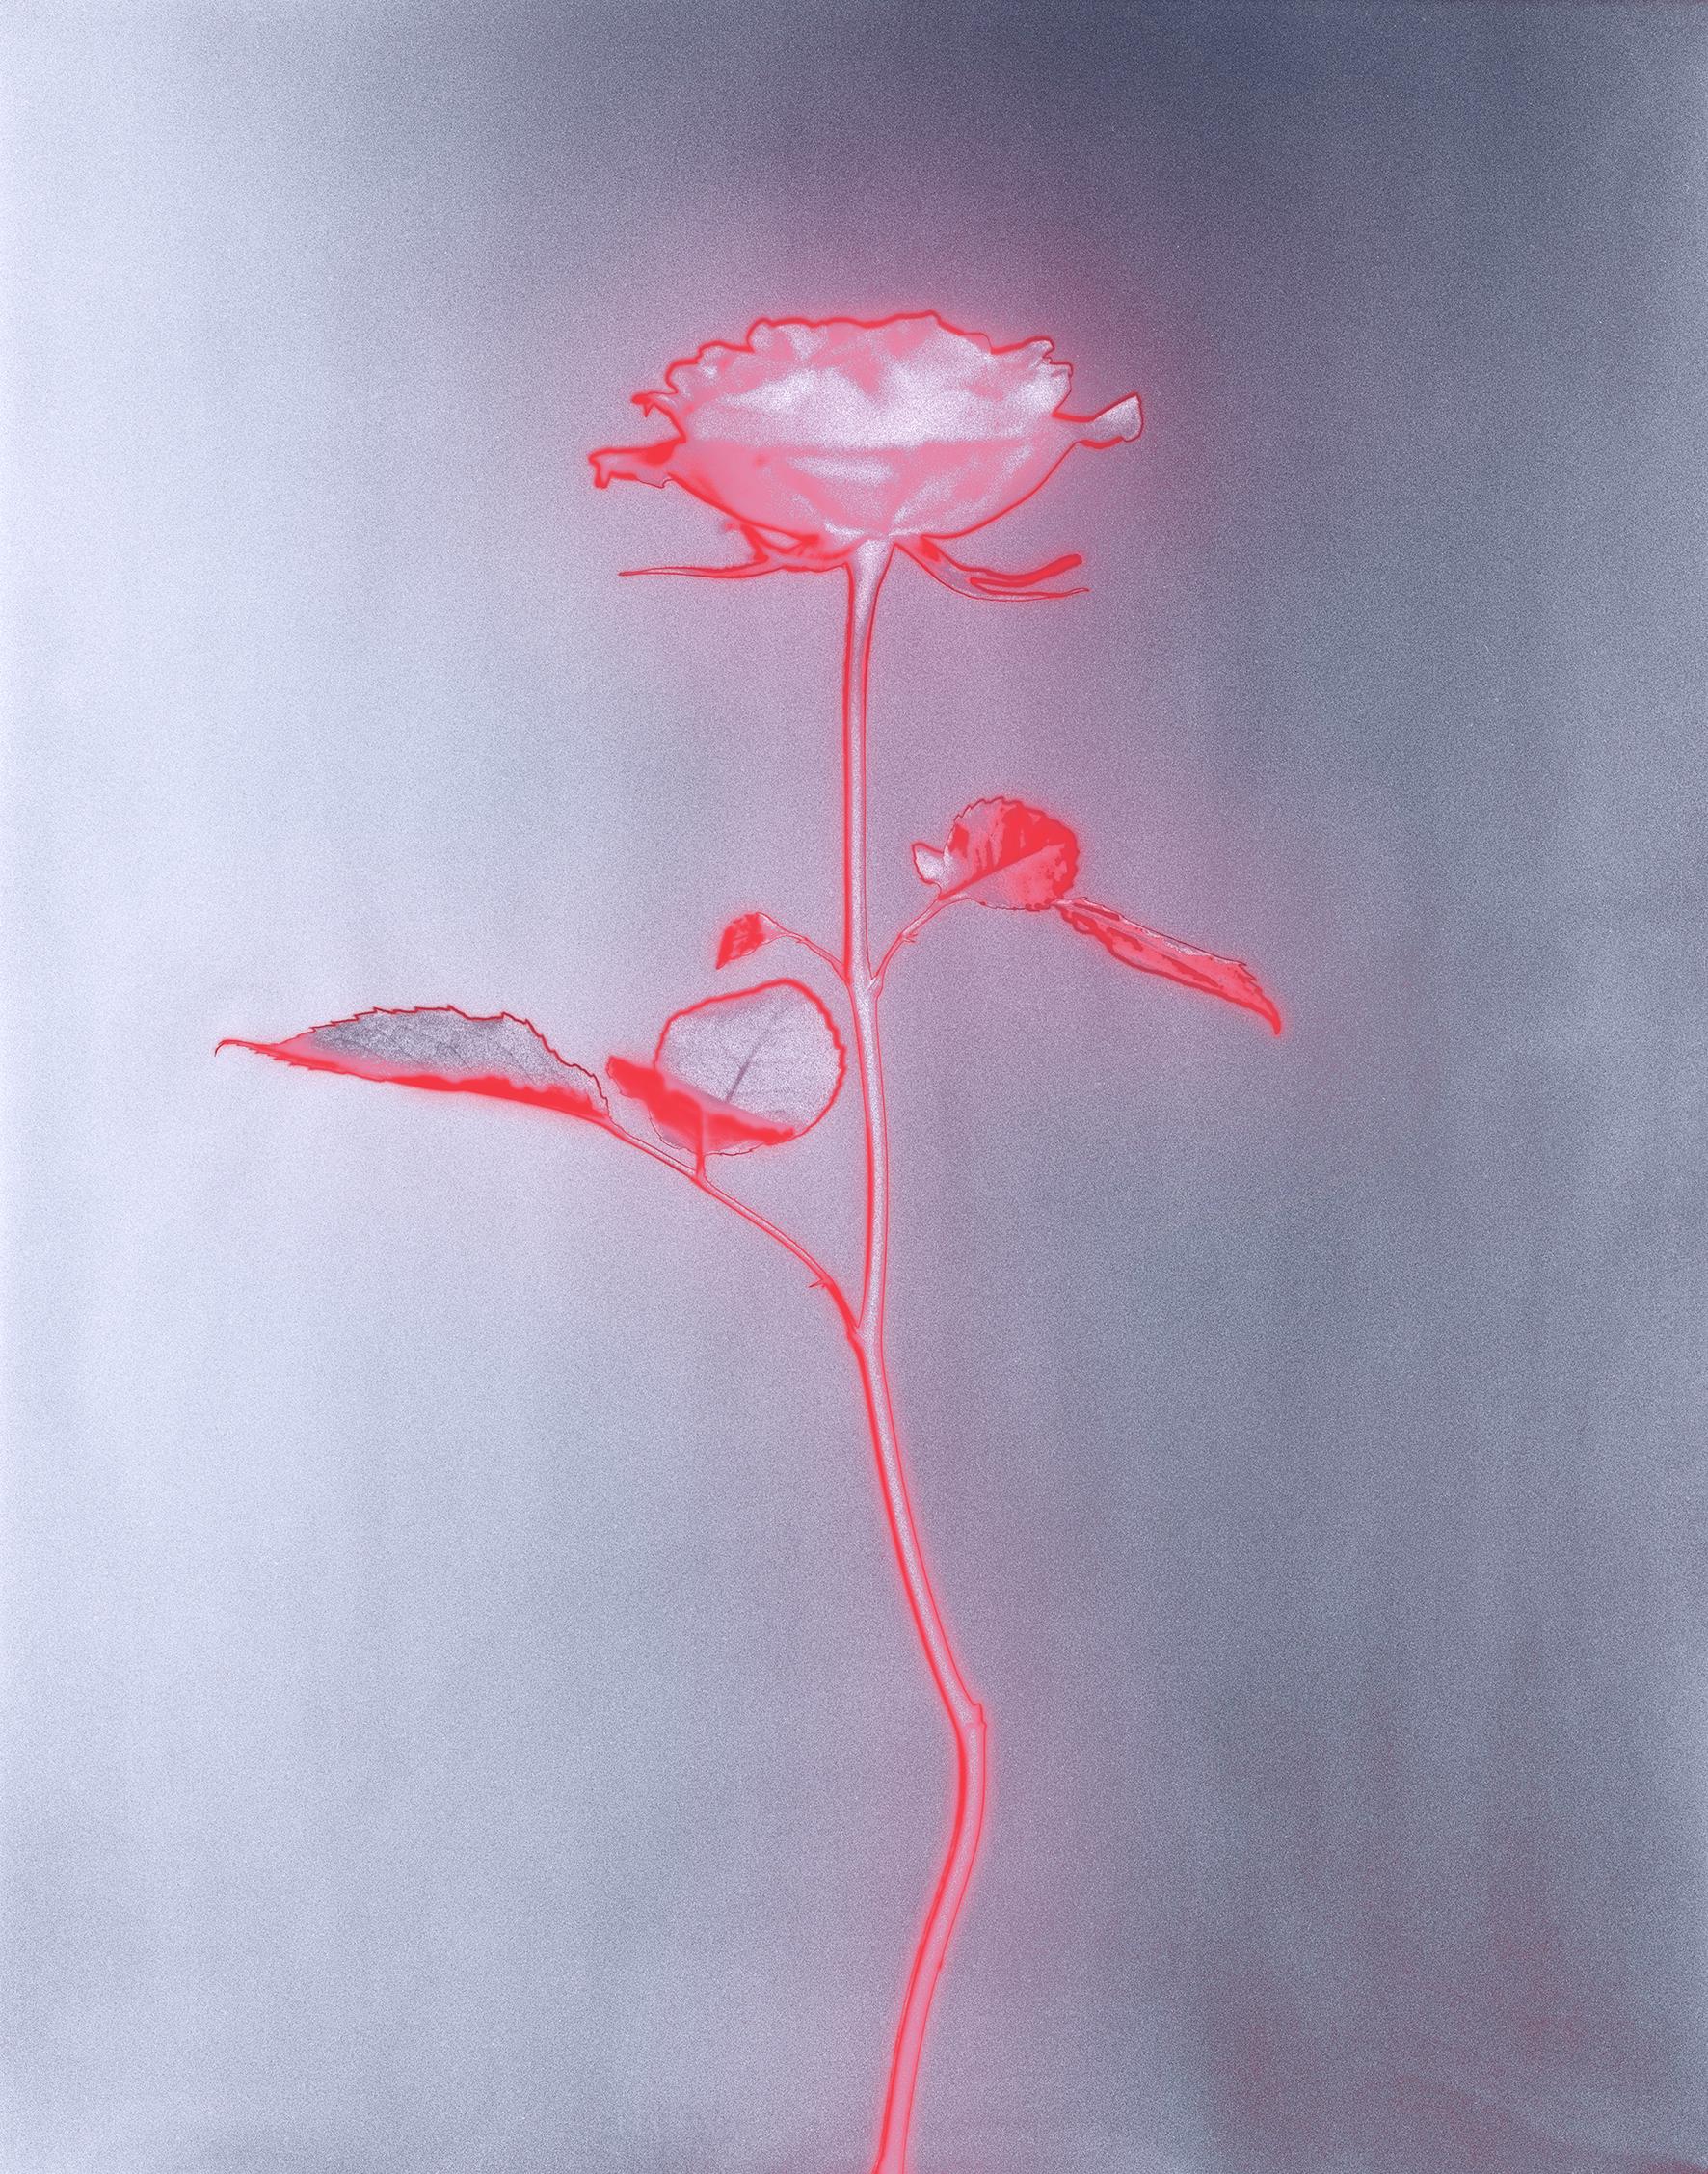 Ugne Pouwell Still-Life Photograph - 'Rose glow' a still-life analogue photograph, contemporary mix media, pink/red